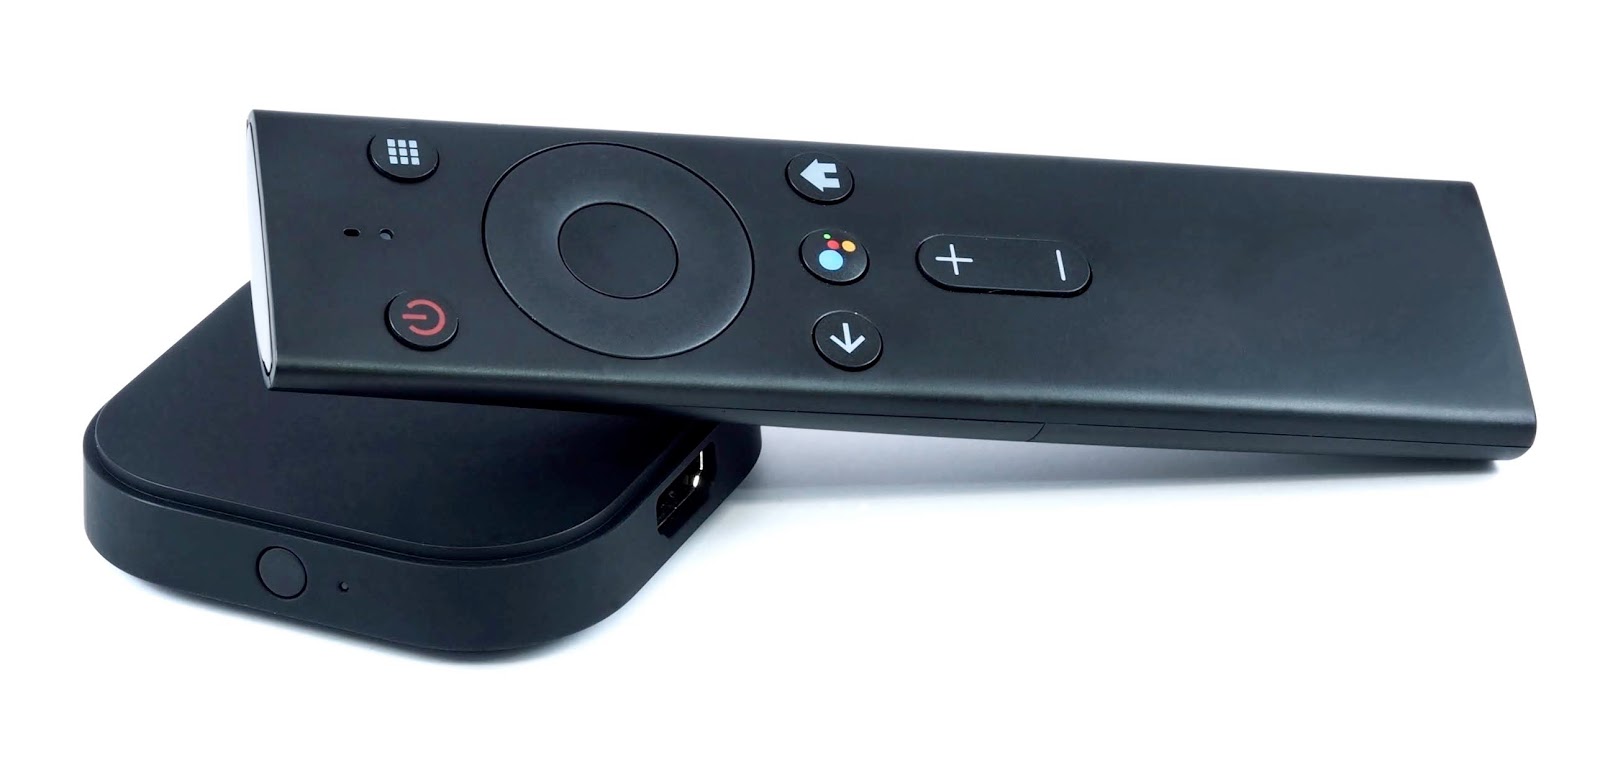 Android TV box and remote